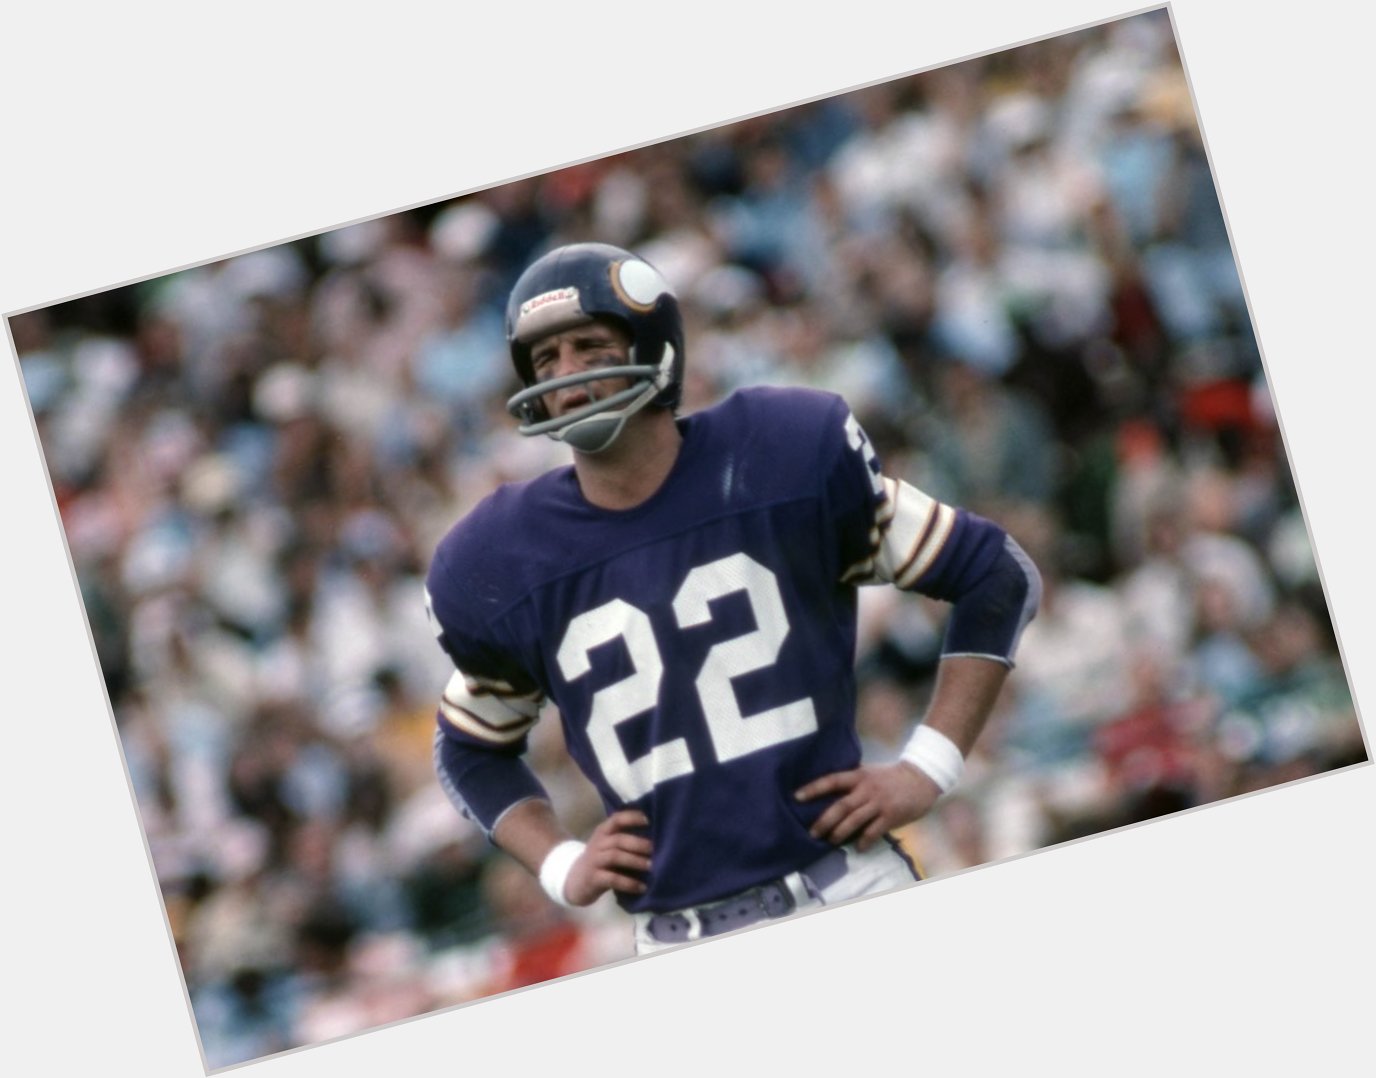 Happy 81st birthday, Paul Krause!

Krause has the most INTs in history with 81. 